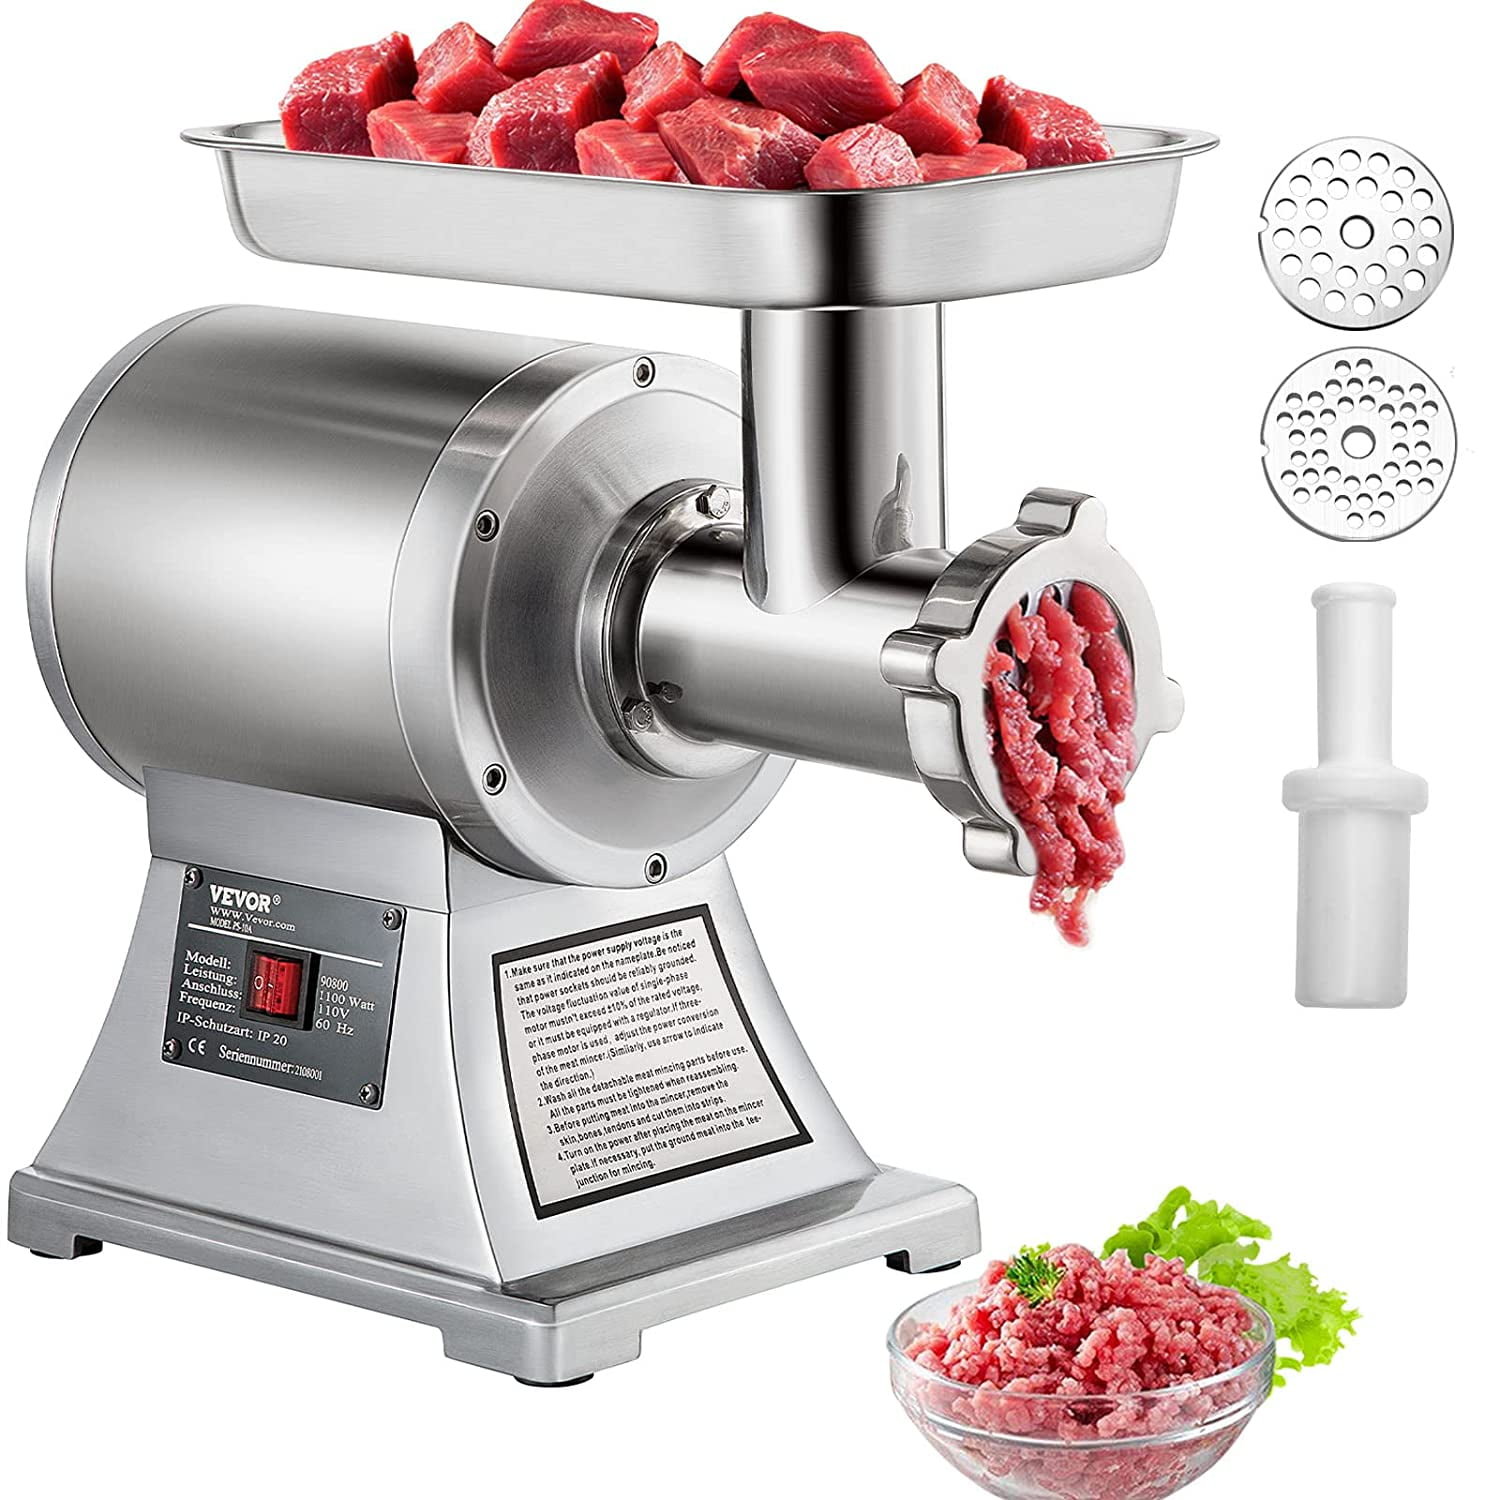 Loygkgas New 700W Electric Vegetable Food Chopper Cutter Meat Grinder Mincer Machine, Size: As Shown